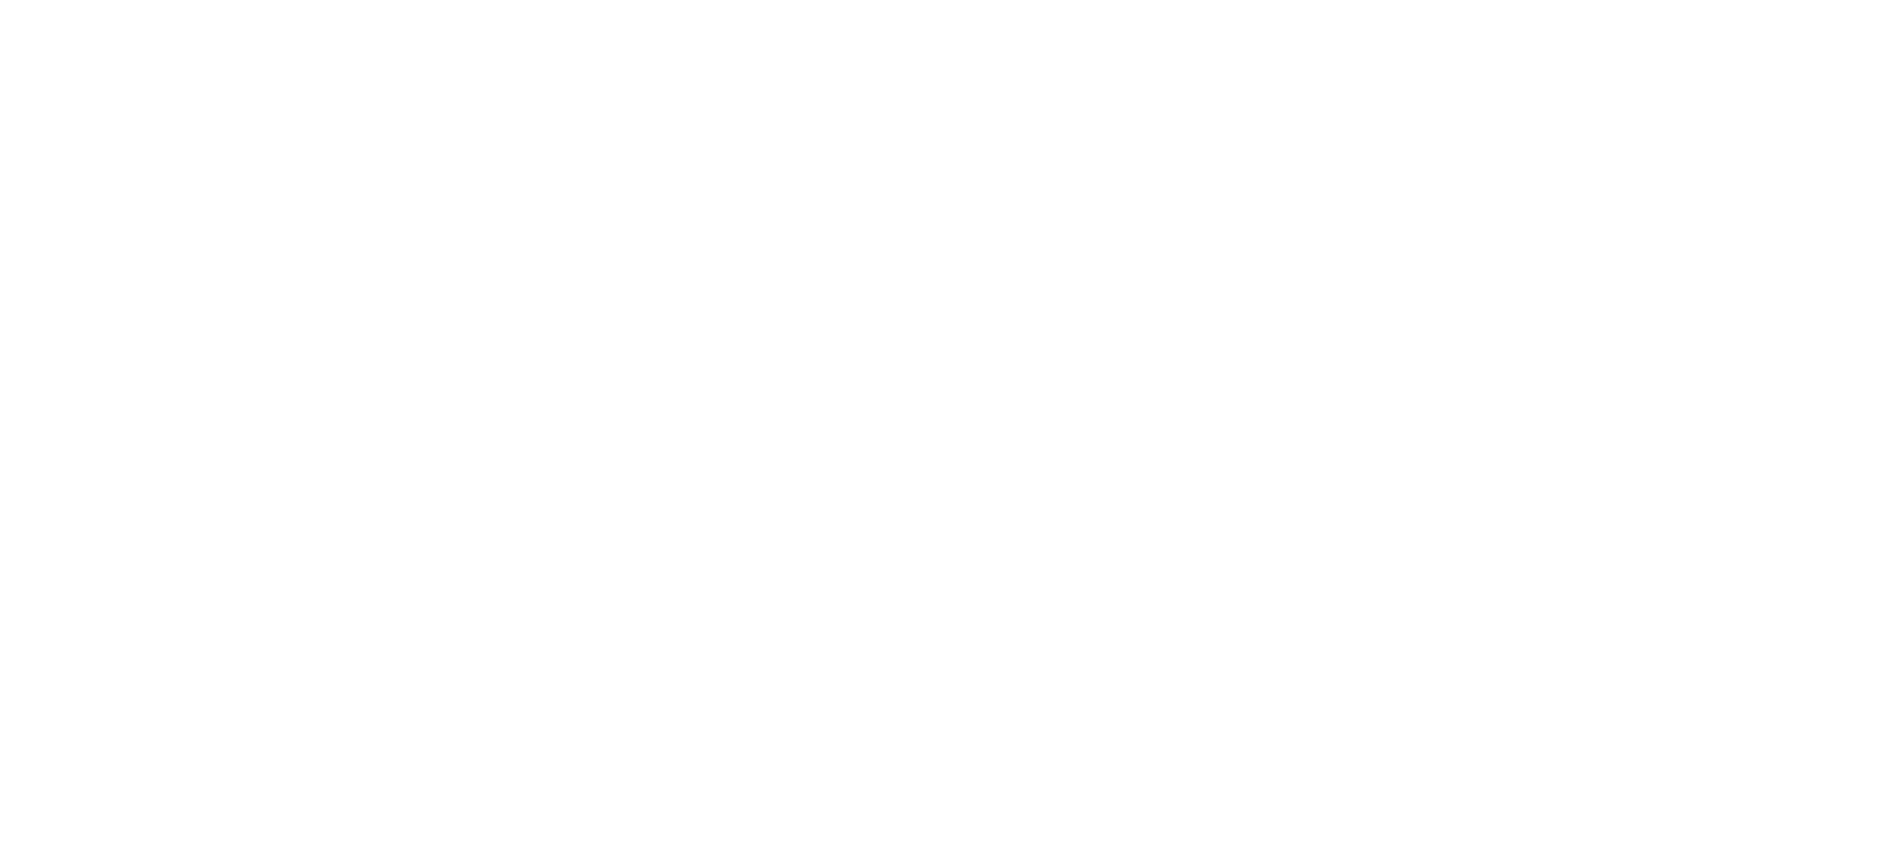 Escape from Tarkov PNG images Download logo